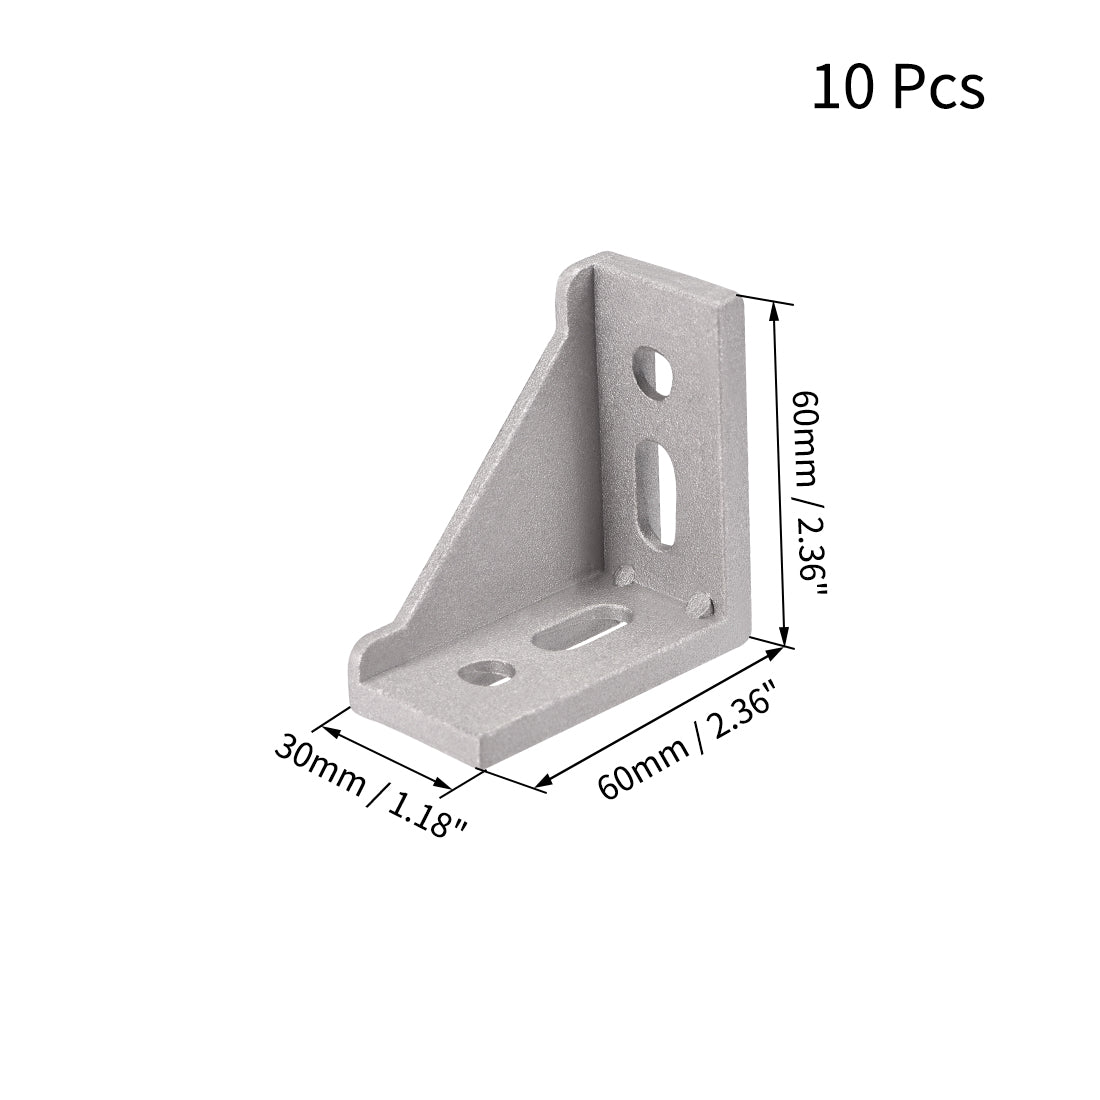 uxcell Uxcell Inside Corner Bracket Gusset, 60mm x 60mm for 3030 Series Aluminum Extrusion Profile with Slot 8mm, 10 Pcs (Silver)